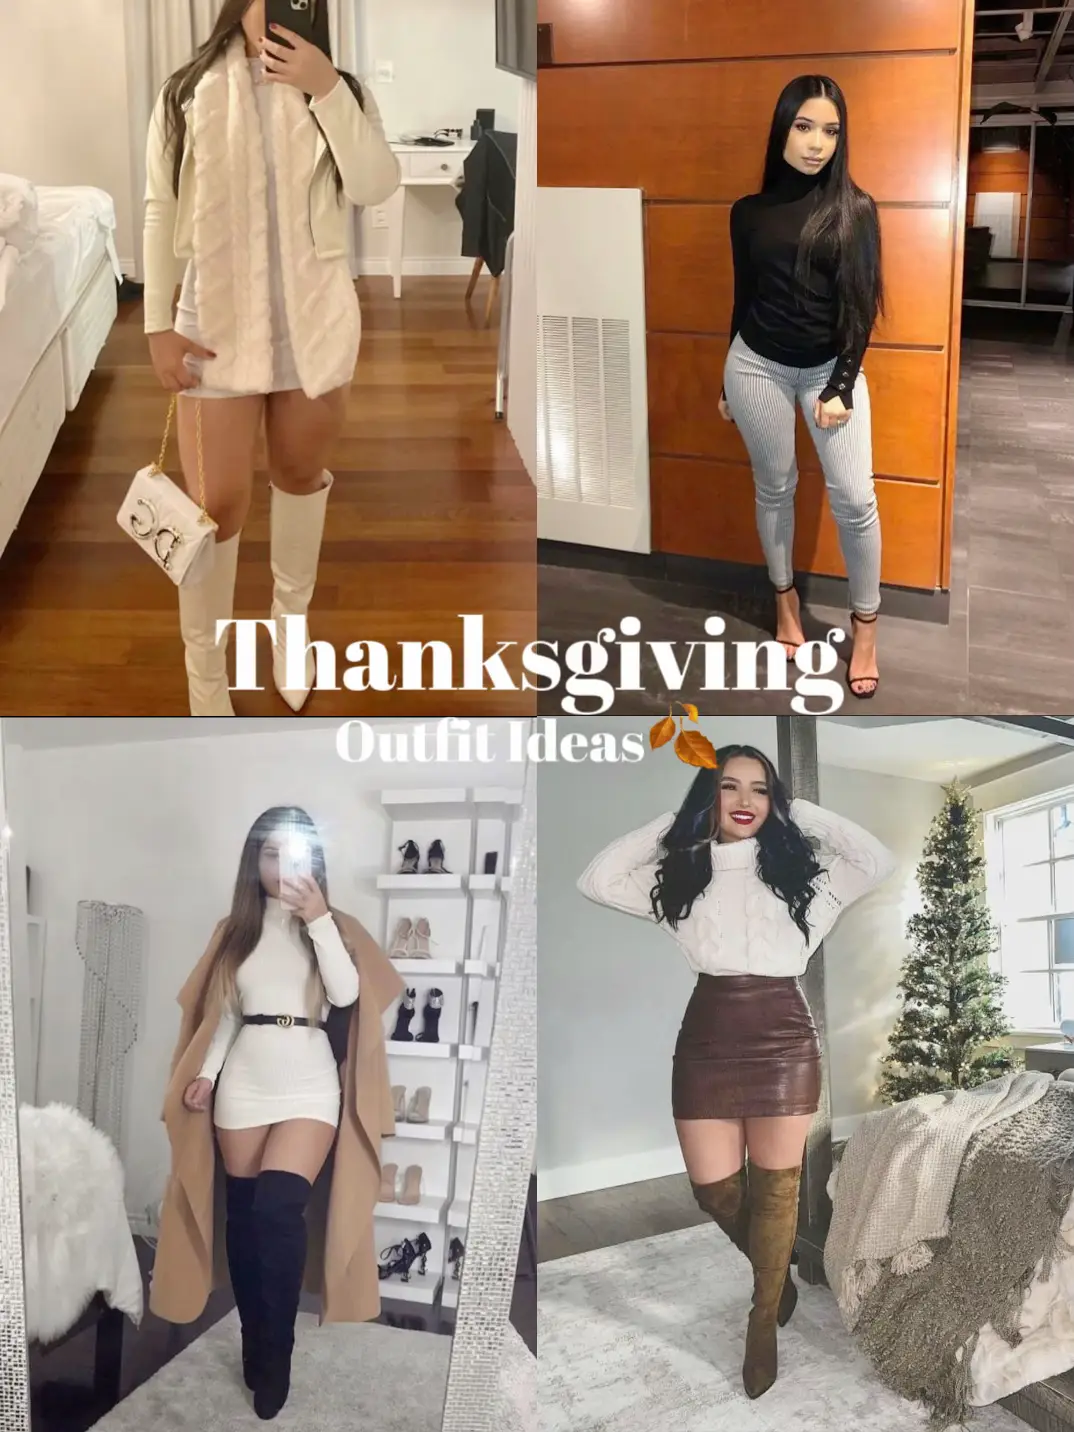 Thanksgiving Outfit Ideas: Maxi Skirt & Sweater Pairing - Sydne